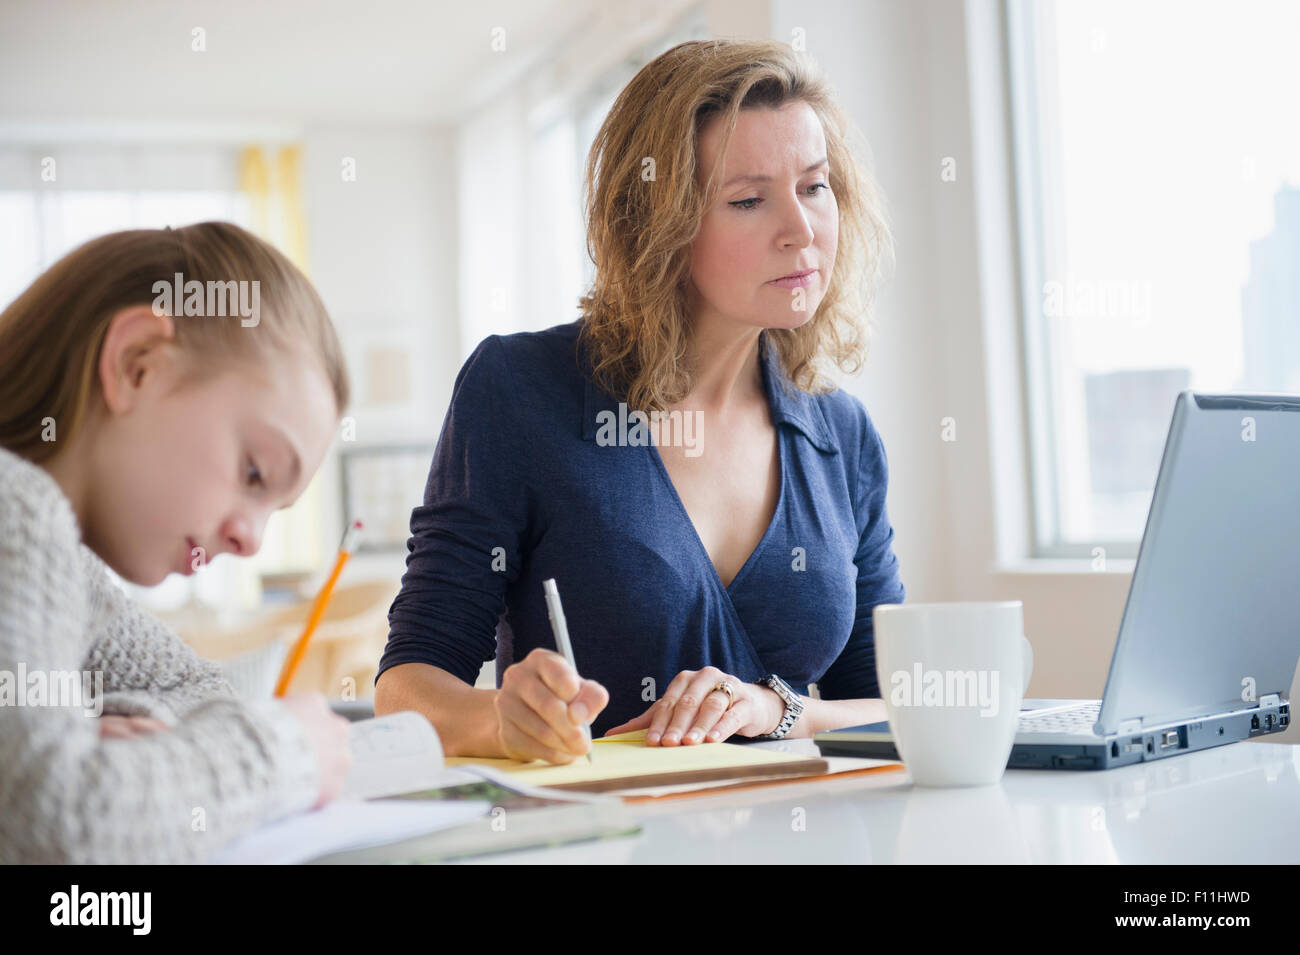 Caucasian mother and daughter working at desk Banque D'Images